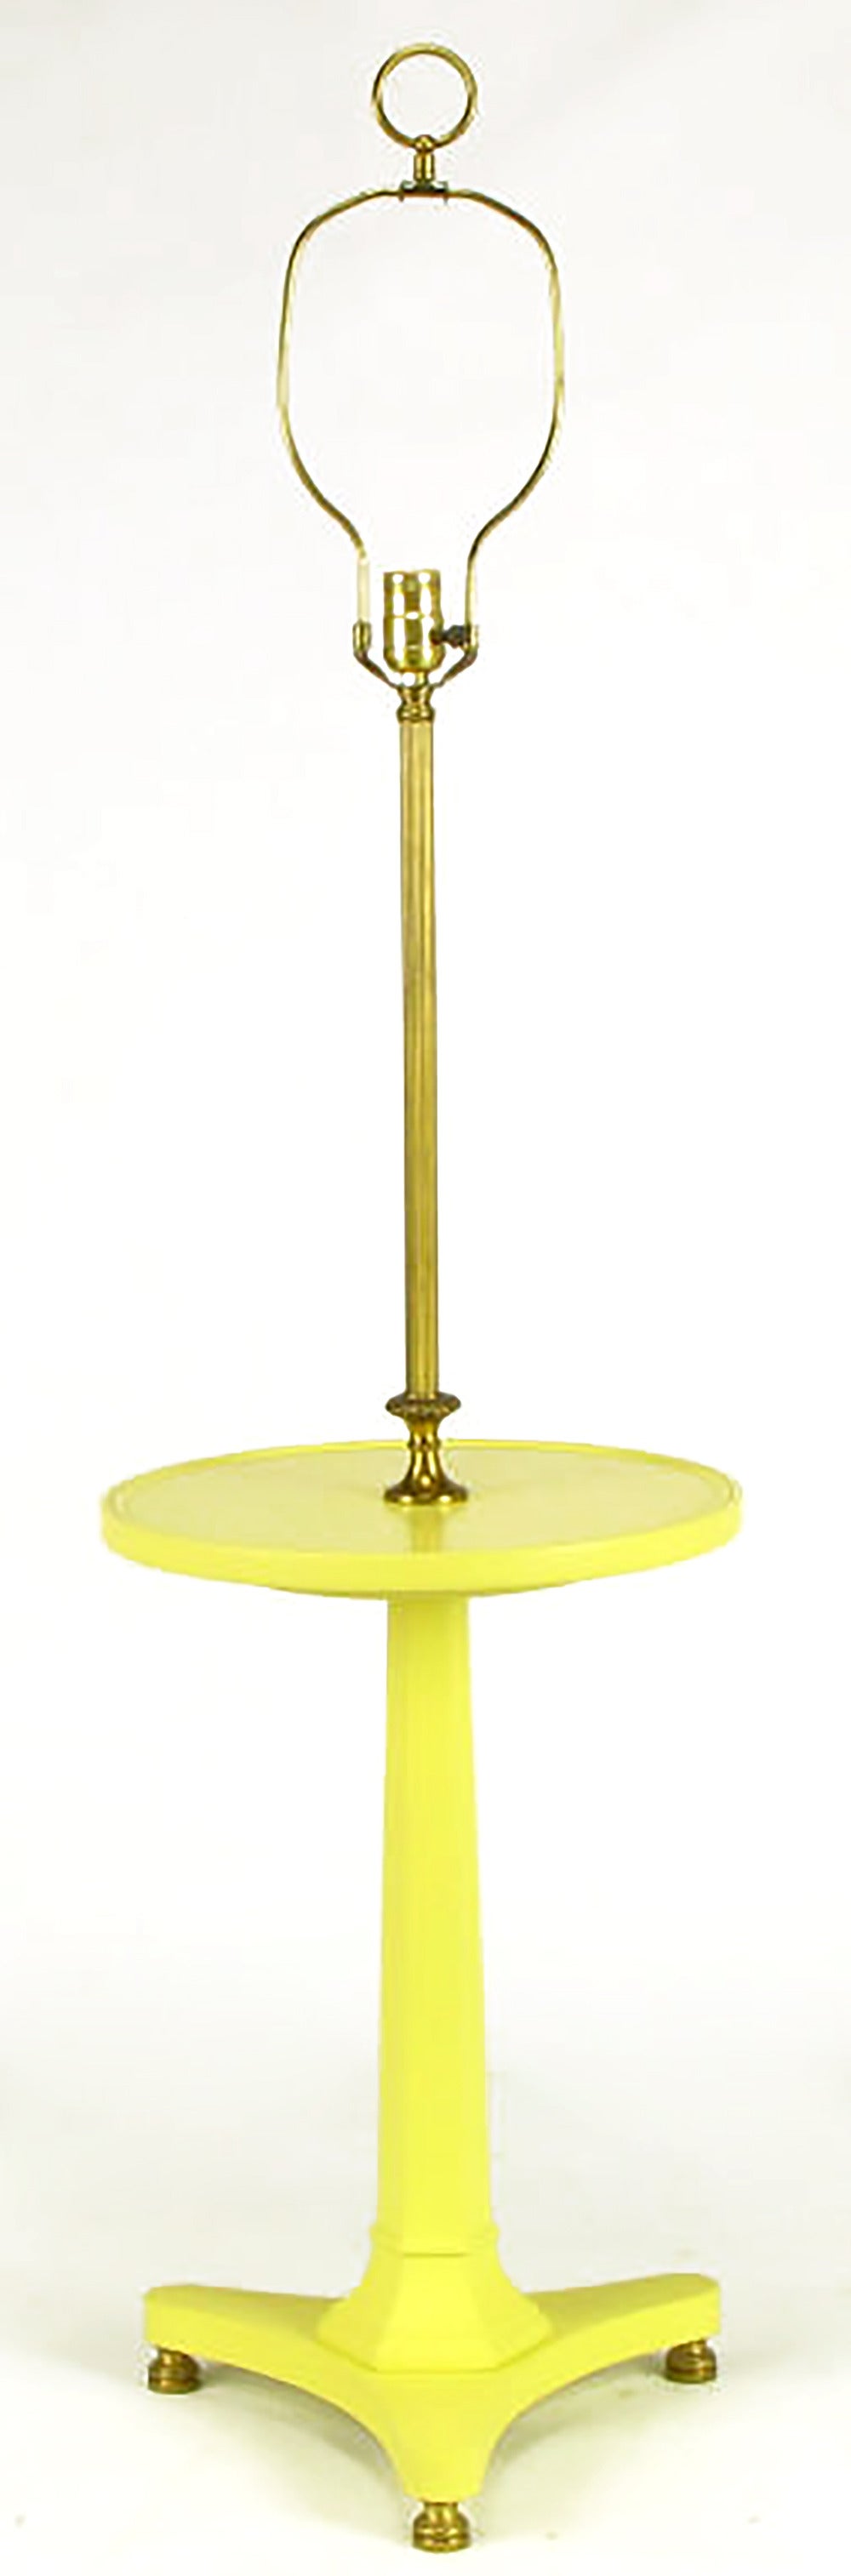 Butter yellow lacquer over carved wood Regency floor lamp with reverse trefoil base, solid brass feet and tapered hexagonal pedestal supporting a 14.5